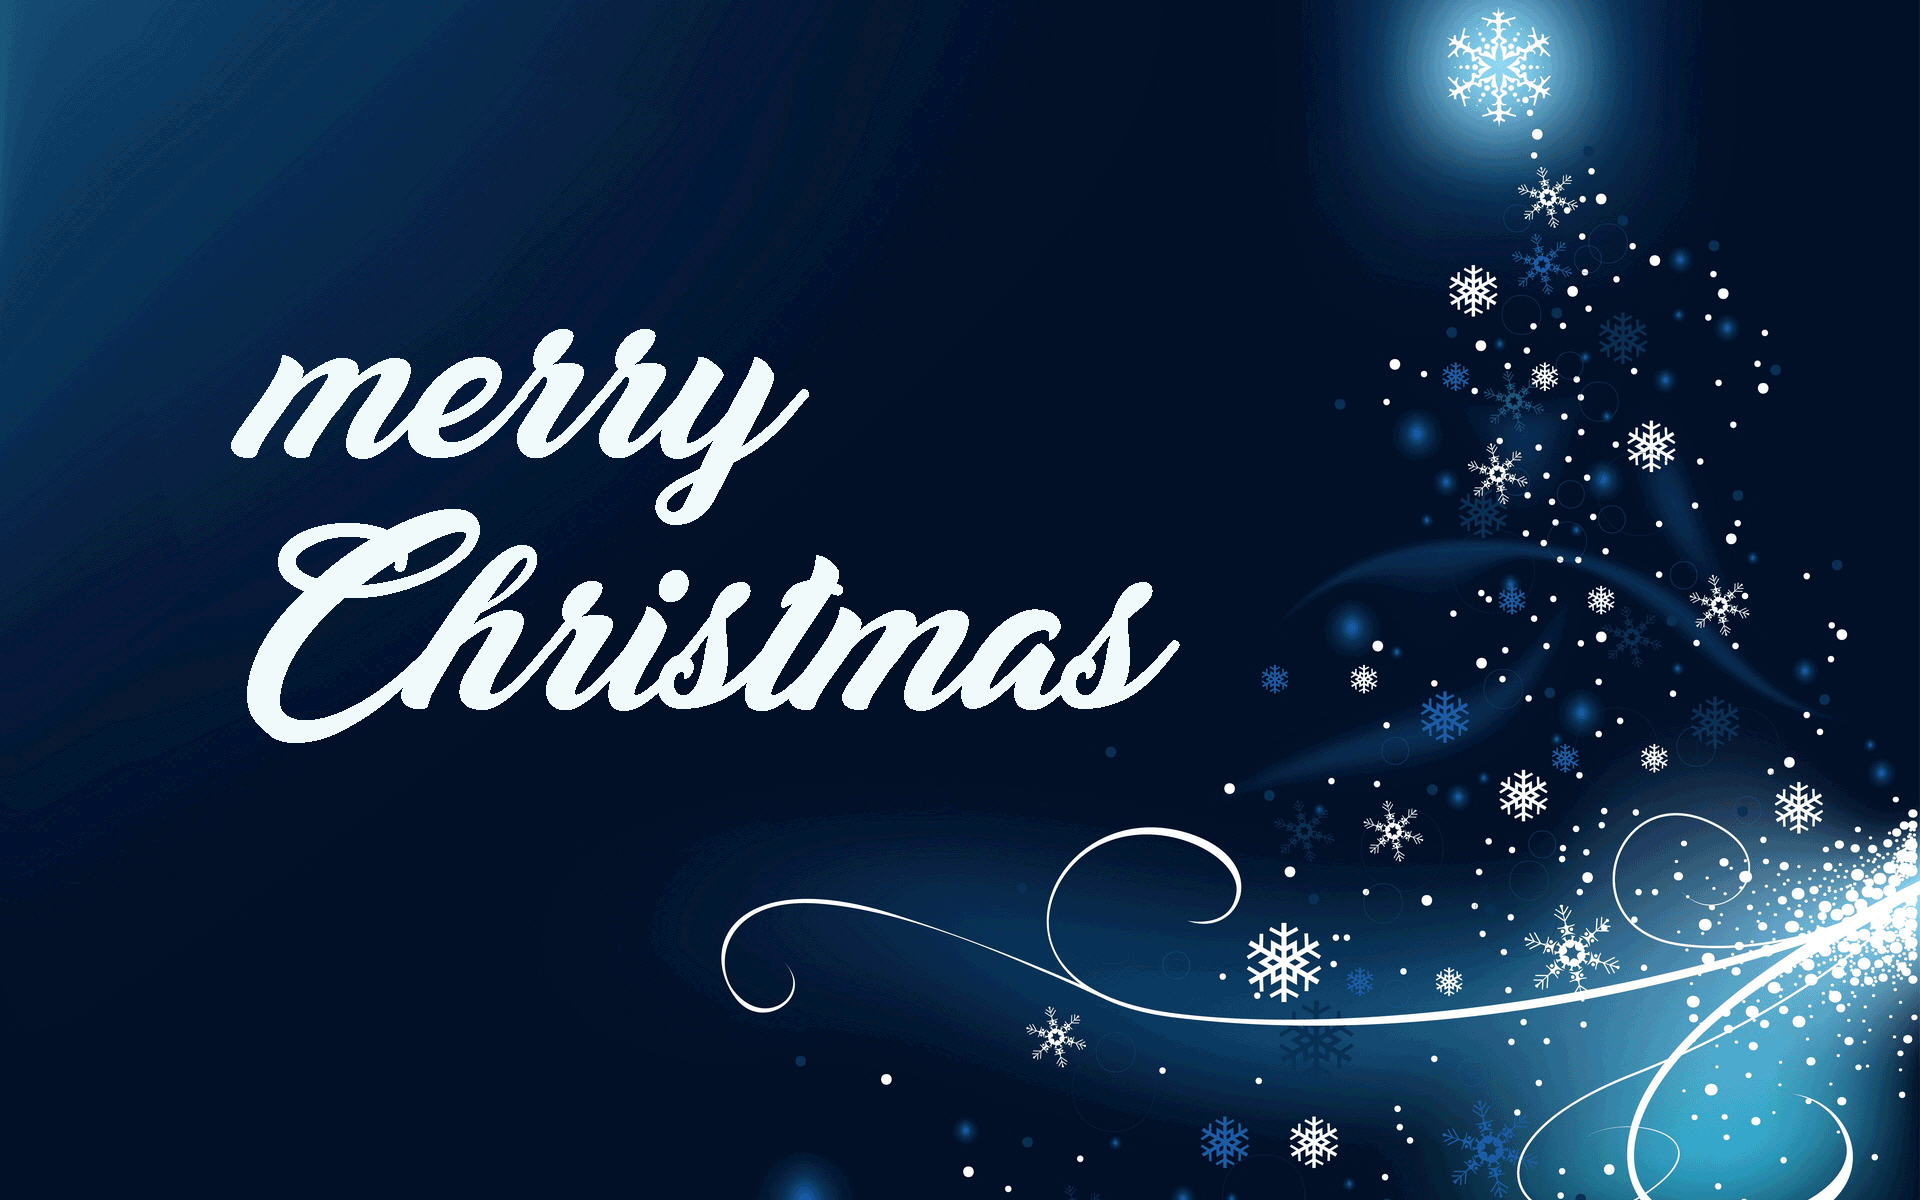 New Christmas Gifs Images 2017 - 9to5 Car Wallpapers